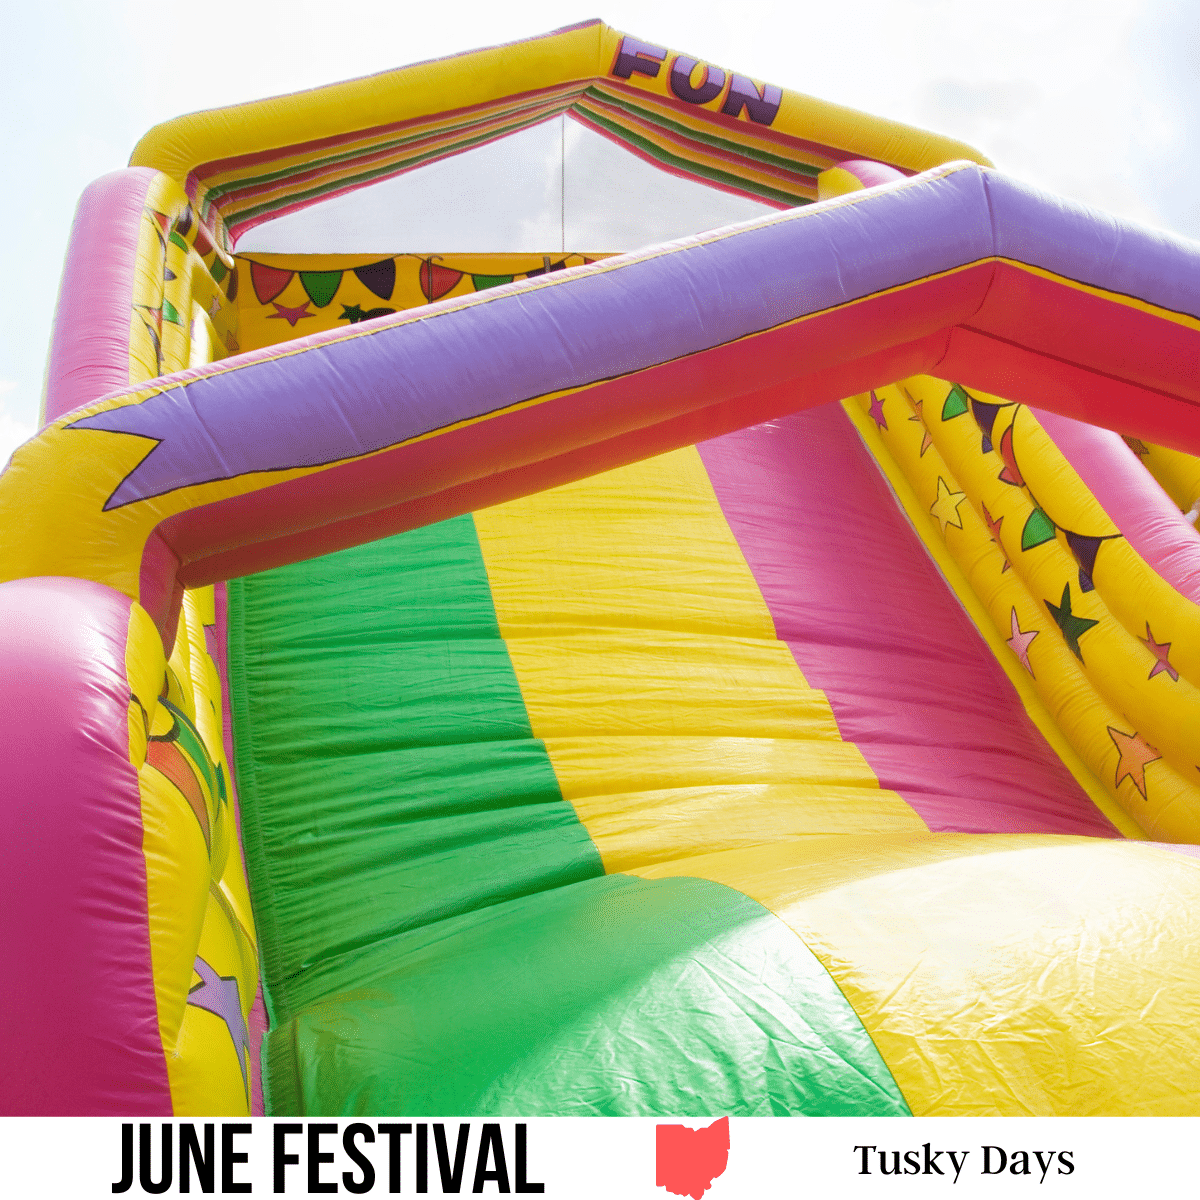 A square image of a photo of an inflatable slide. A white strip across the bottom has text June Festival Tusky Days.